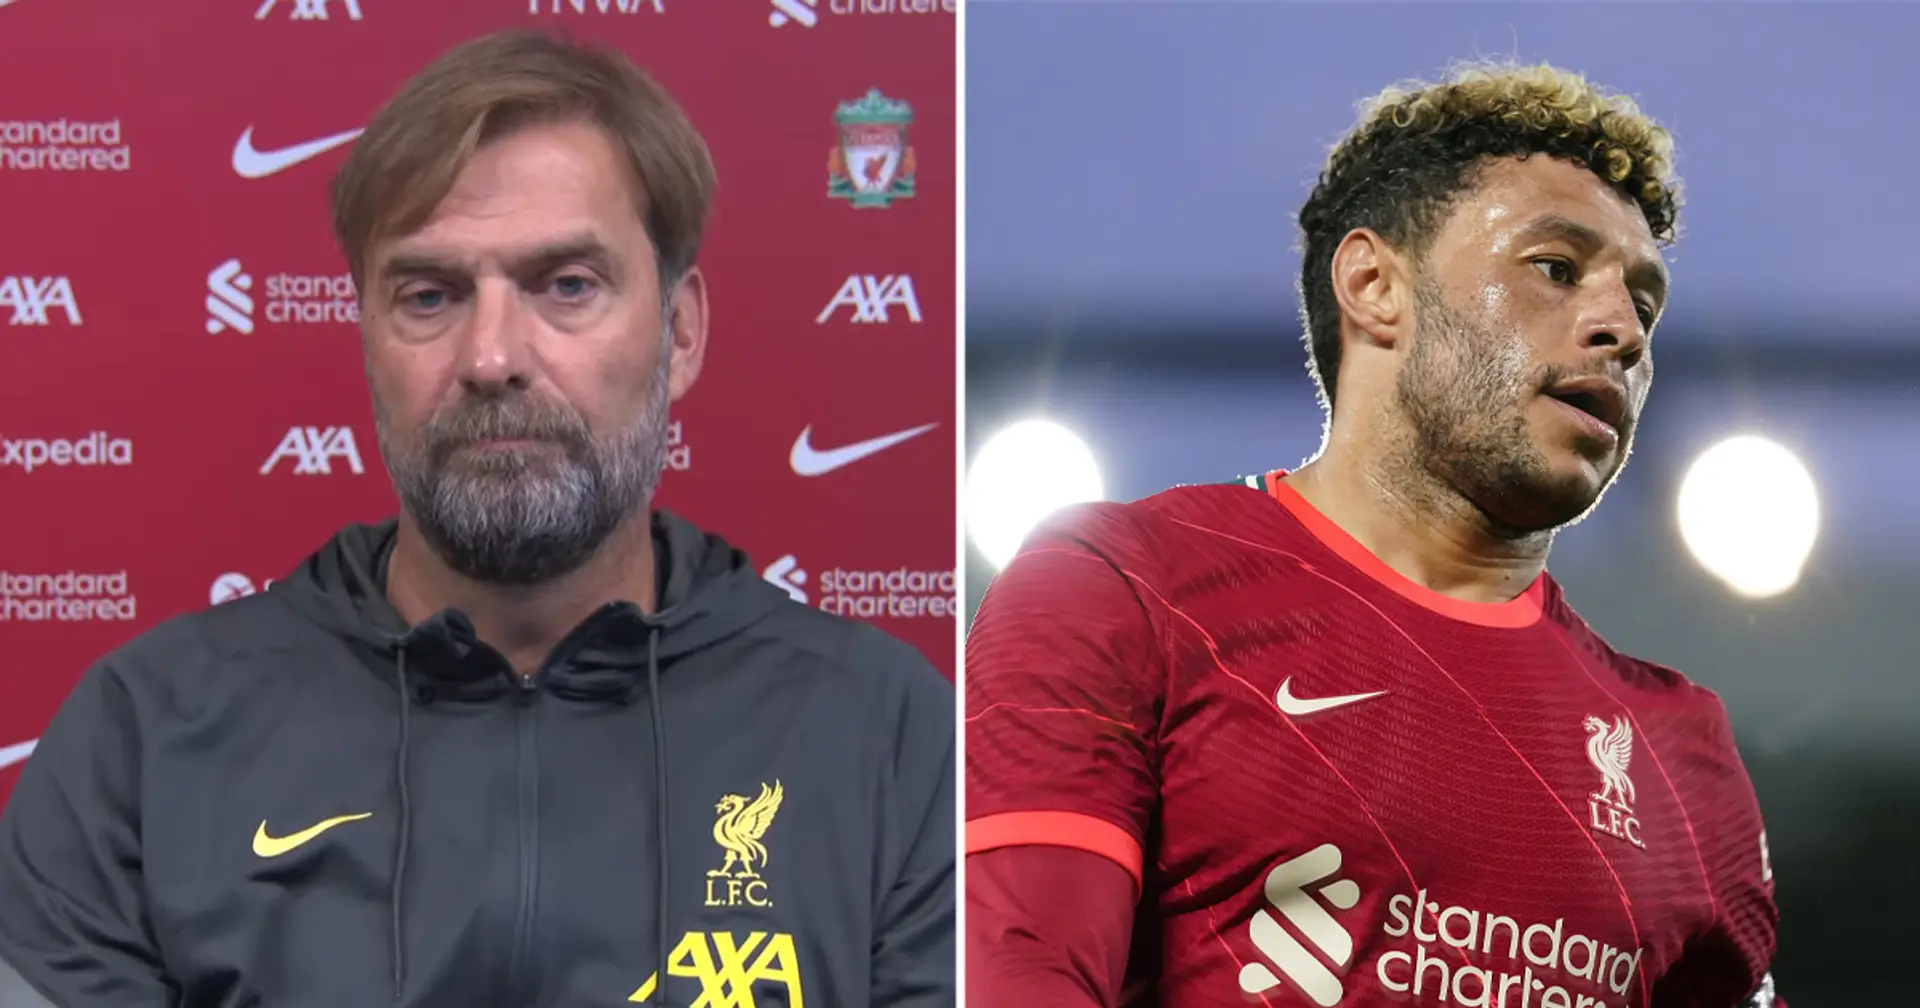 Oxlade-Chamberlain: 'I enjoyed Klopp lot more when I played than when I wasn’t even on the bench'